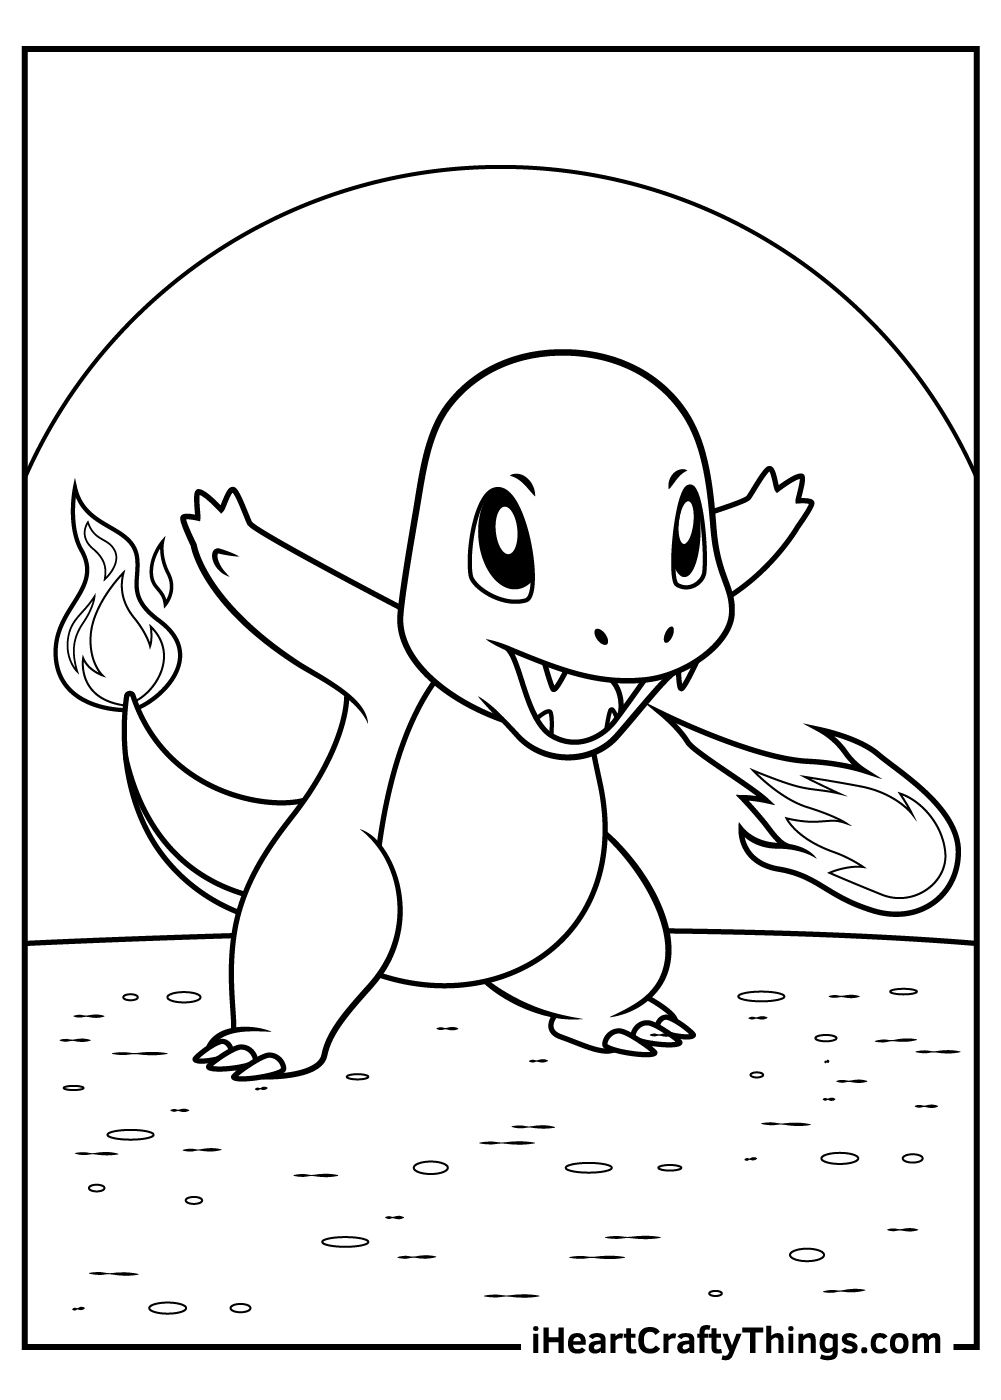 Charmander coloring pages pokemon coloring pages pokemon coloring cute coloring pages